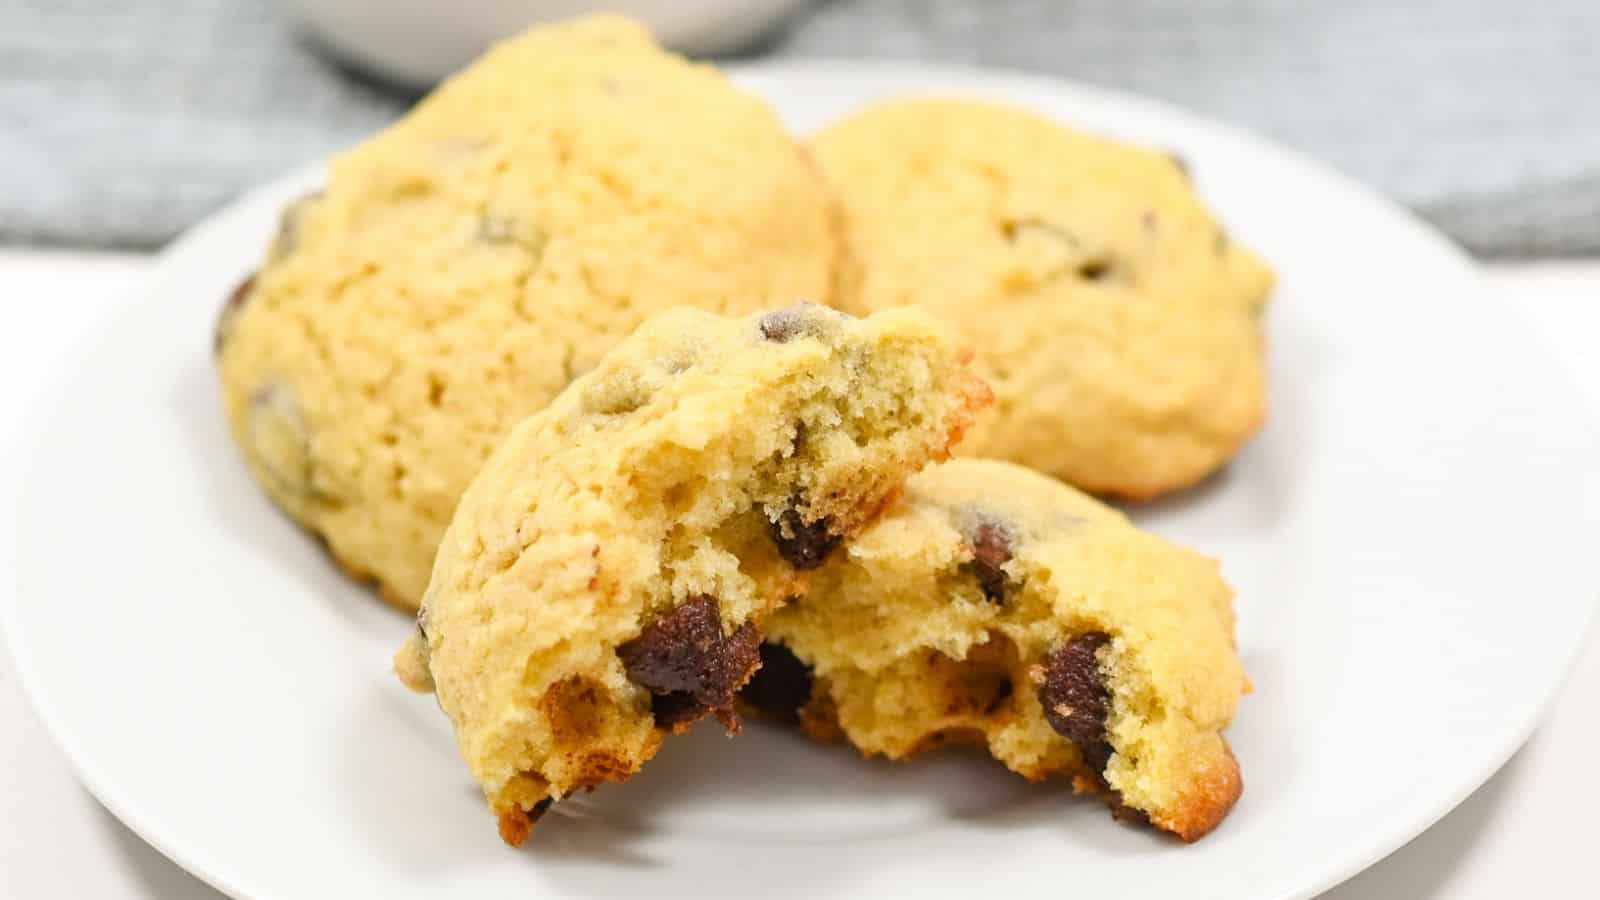 A plate with freshly baked chocolate chip cookies, one cookie is broken in half to show the soft inside.